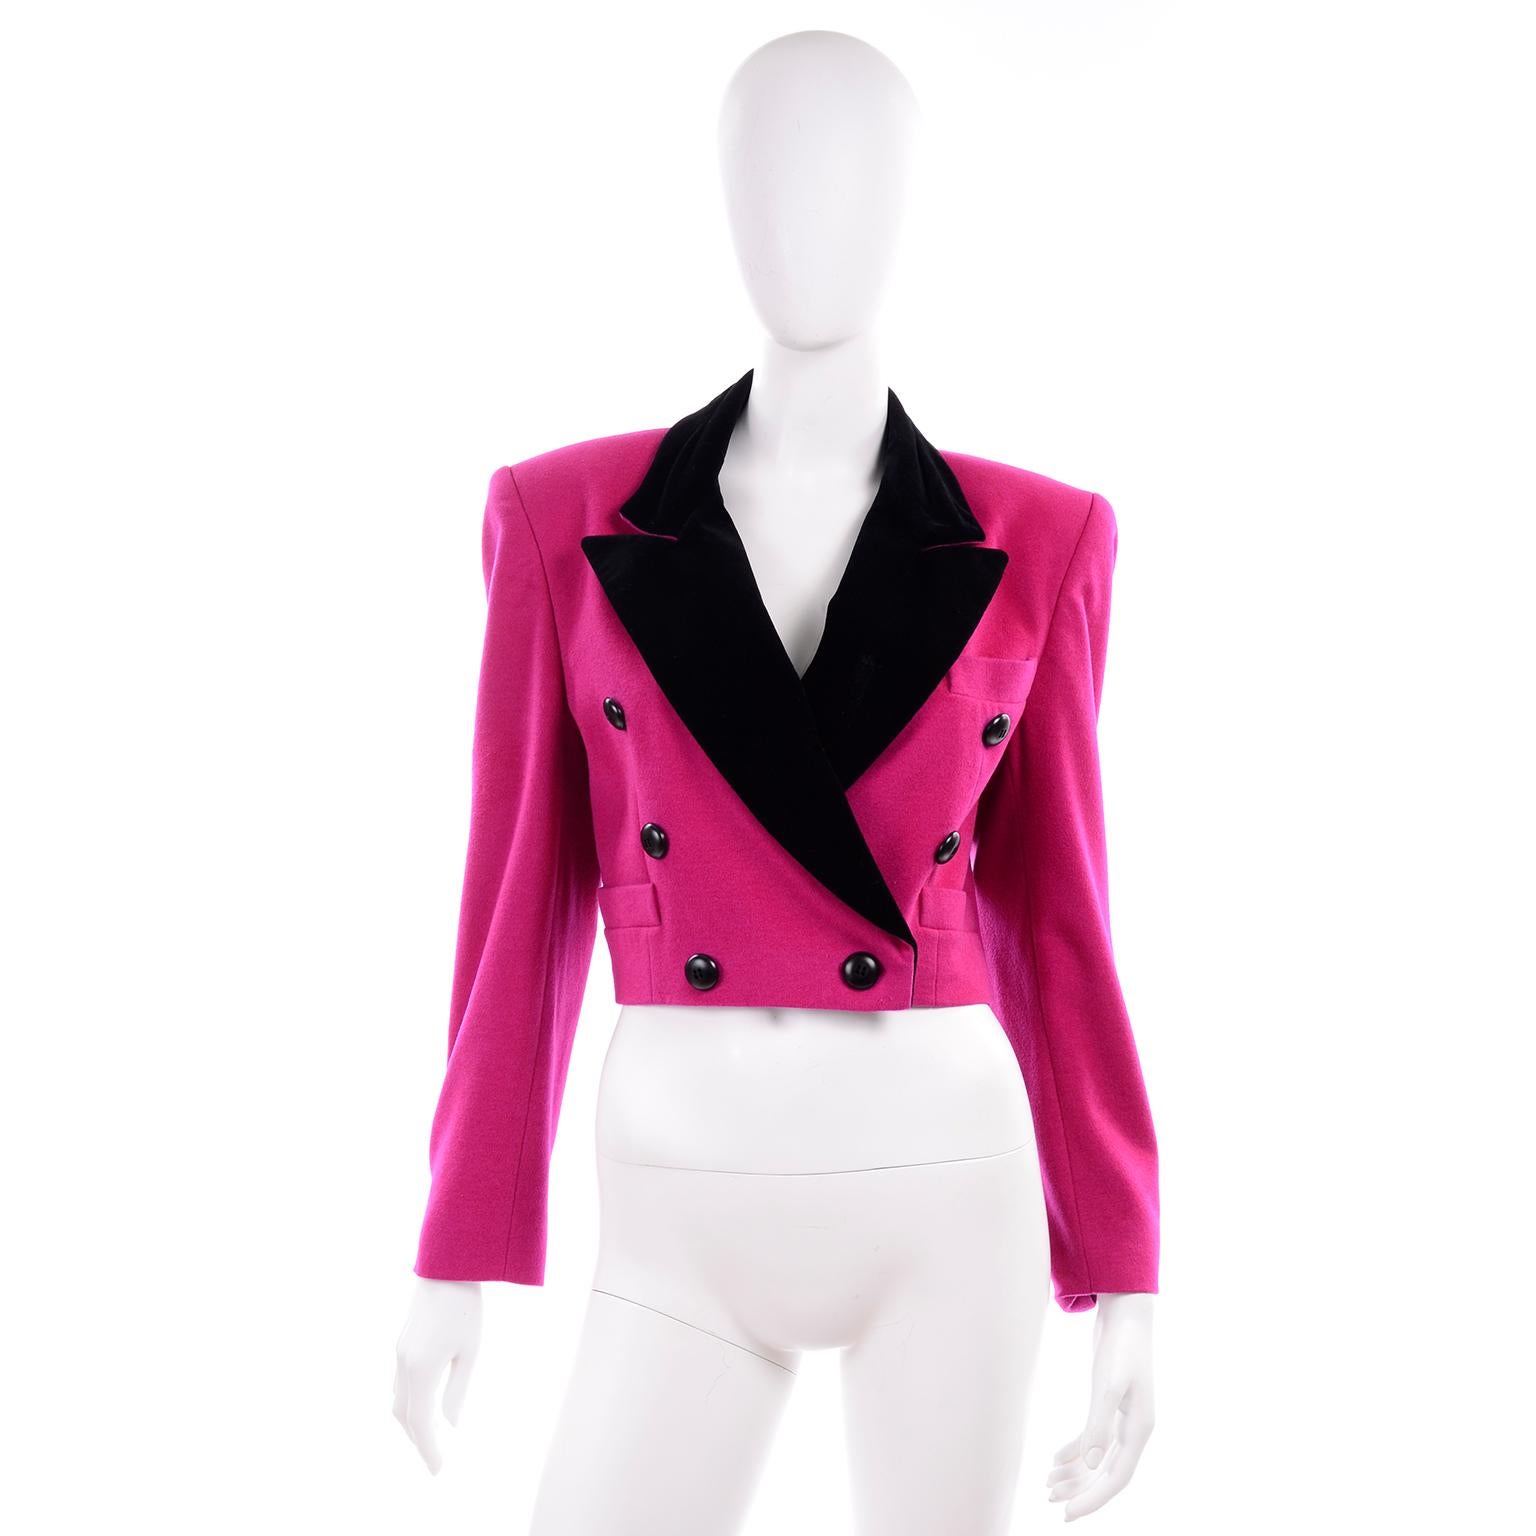 This is a great vintage cropped blazer designed by Margaretha Ley for Escada in the 1980's.  This bright pink silk/wool blend double breasted jacket has black velvet lapels, black buttons on the cuffs of sleeves and on the front. and 3 front